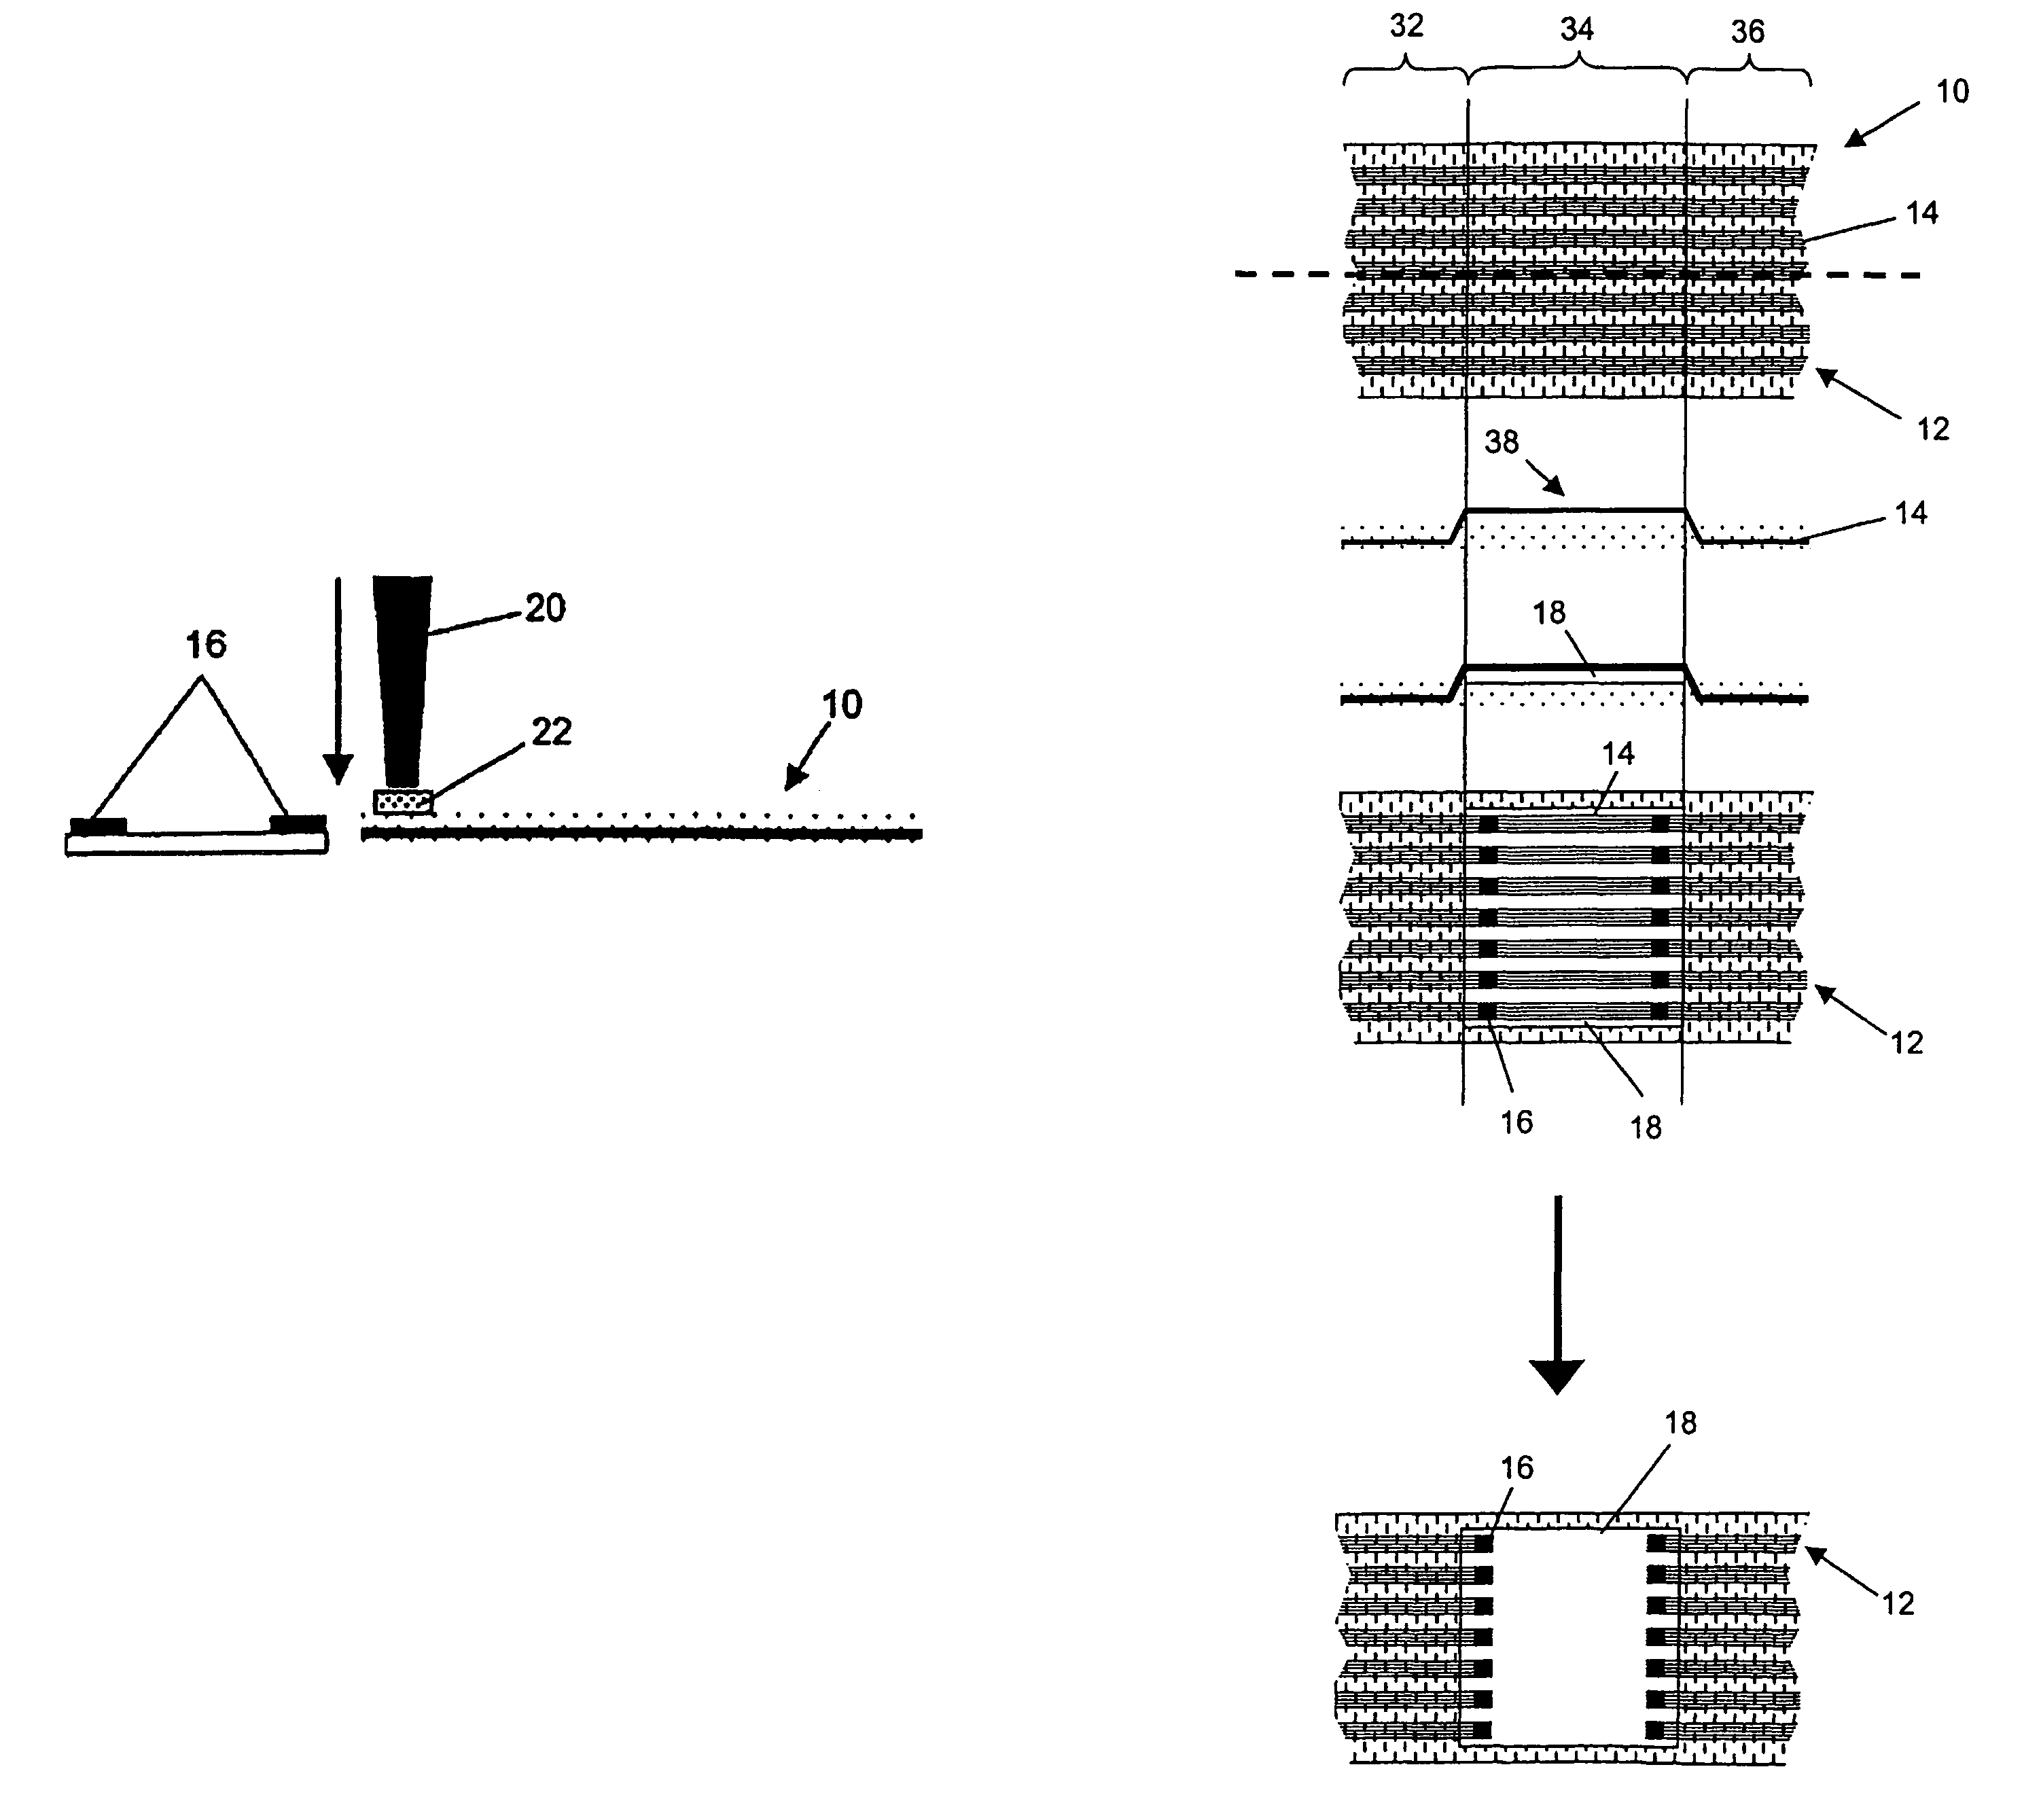 Construction and electrical connection technique in textile structures